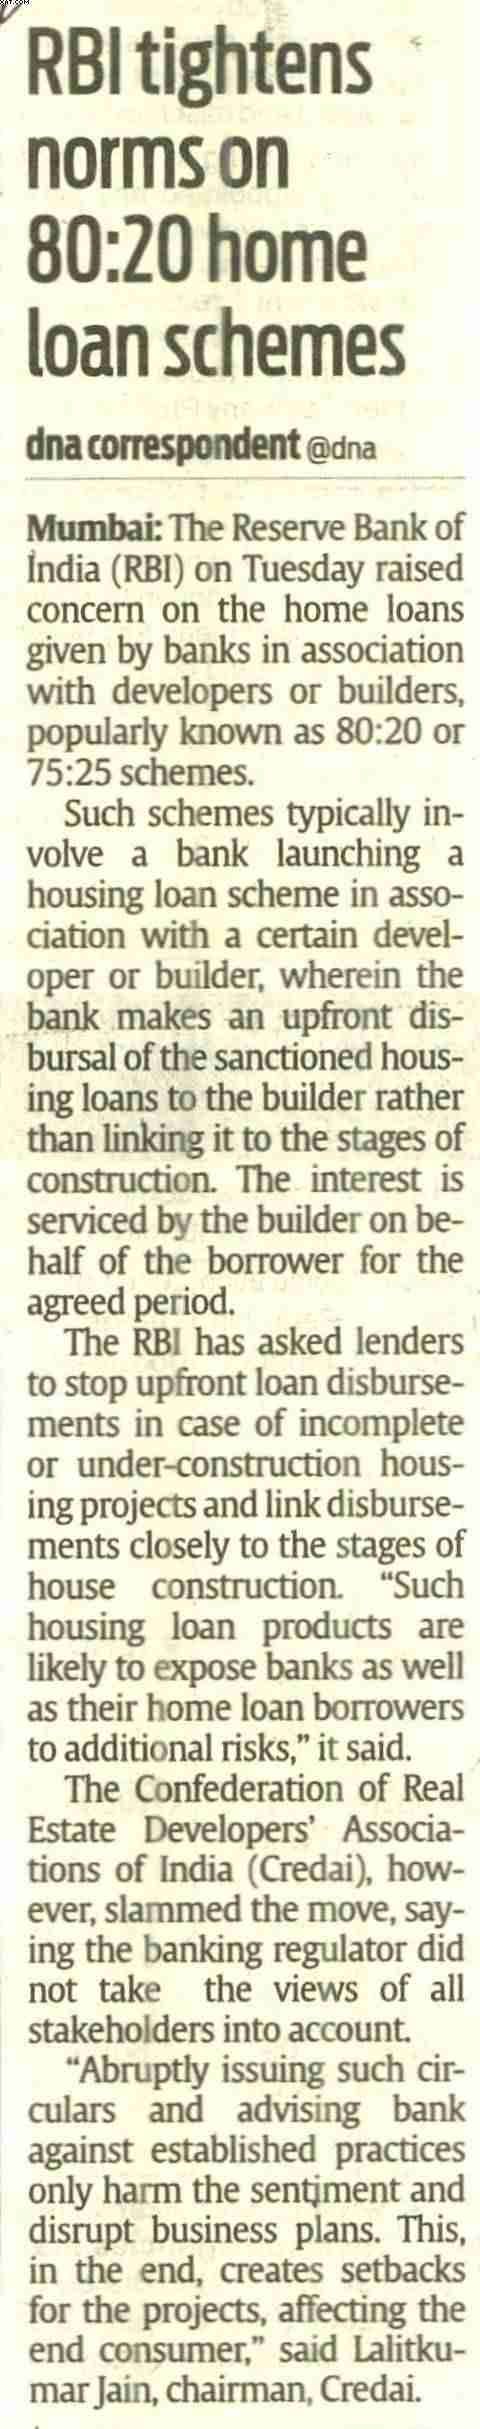 RBI tightens norms on 80:20 home loan schemes